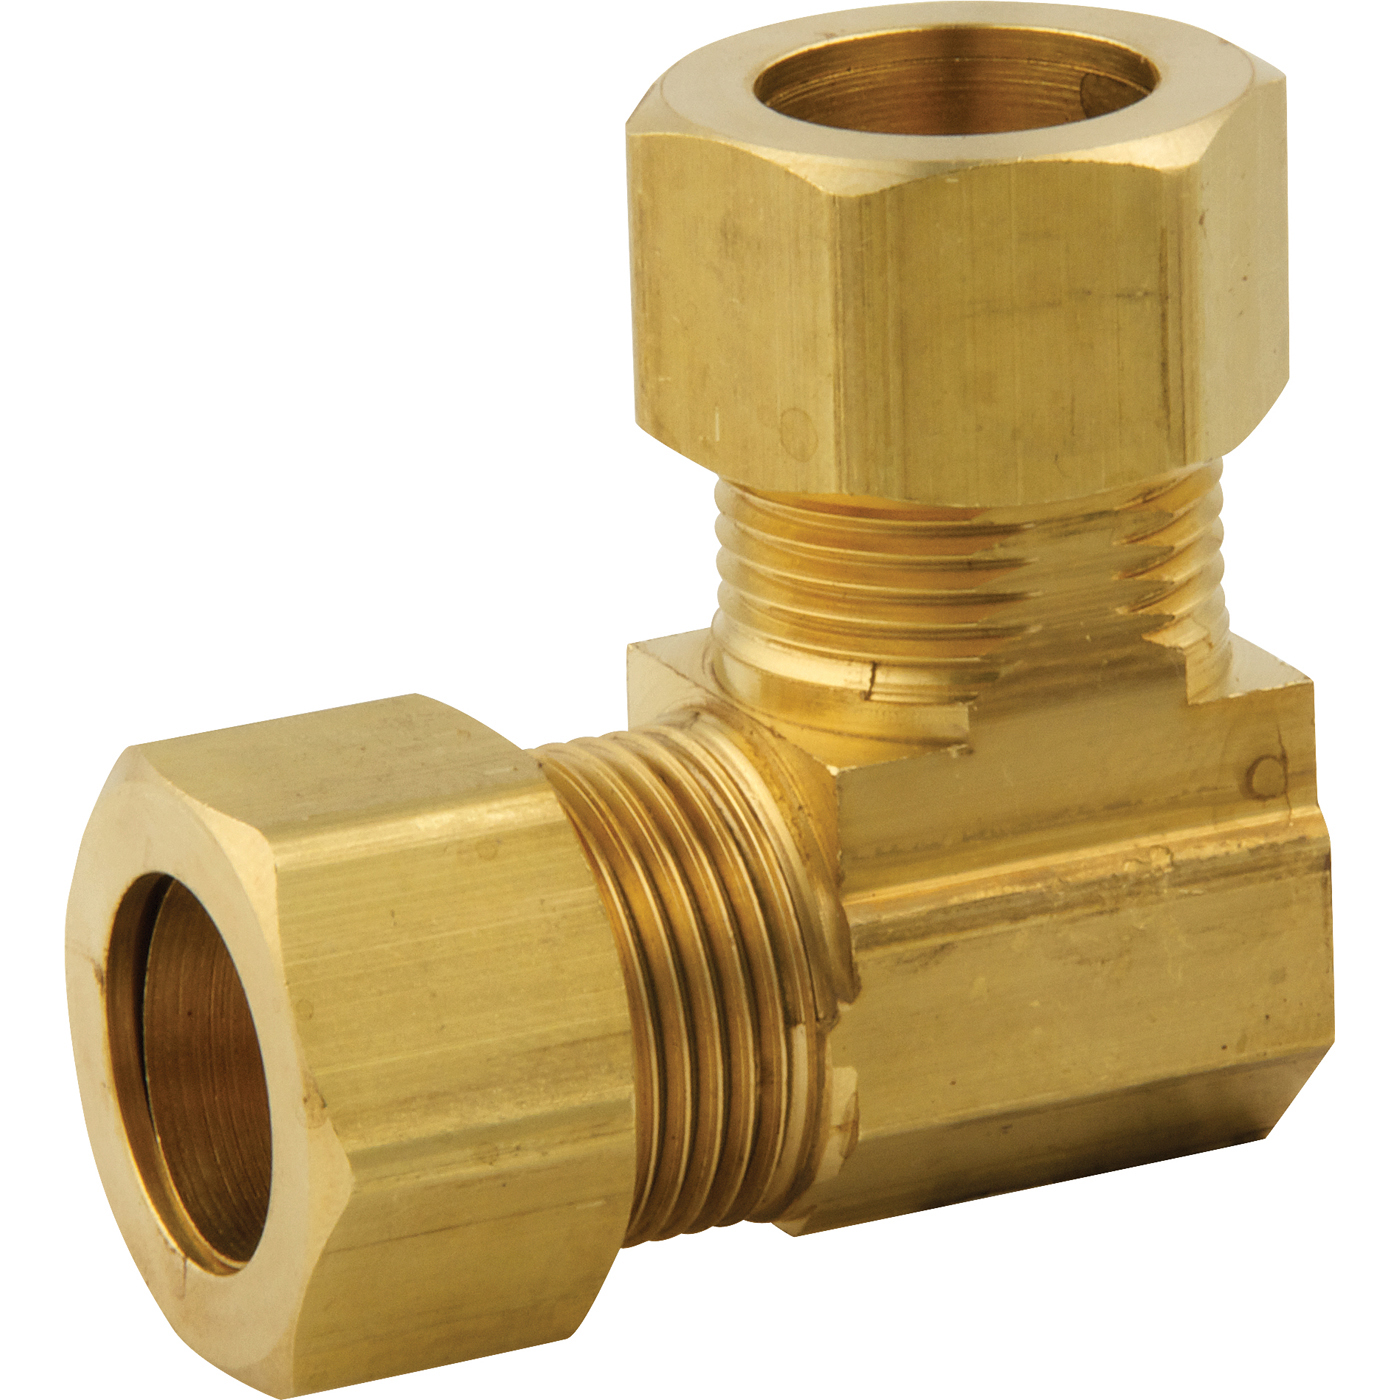 Compression fitting - Union elbow - Master Plumber®